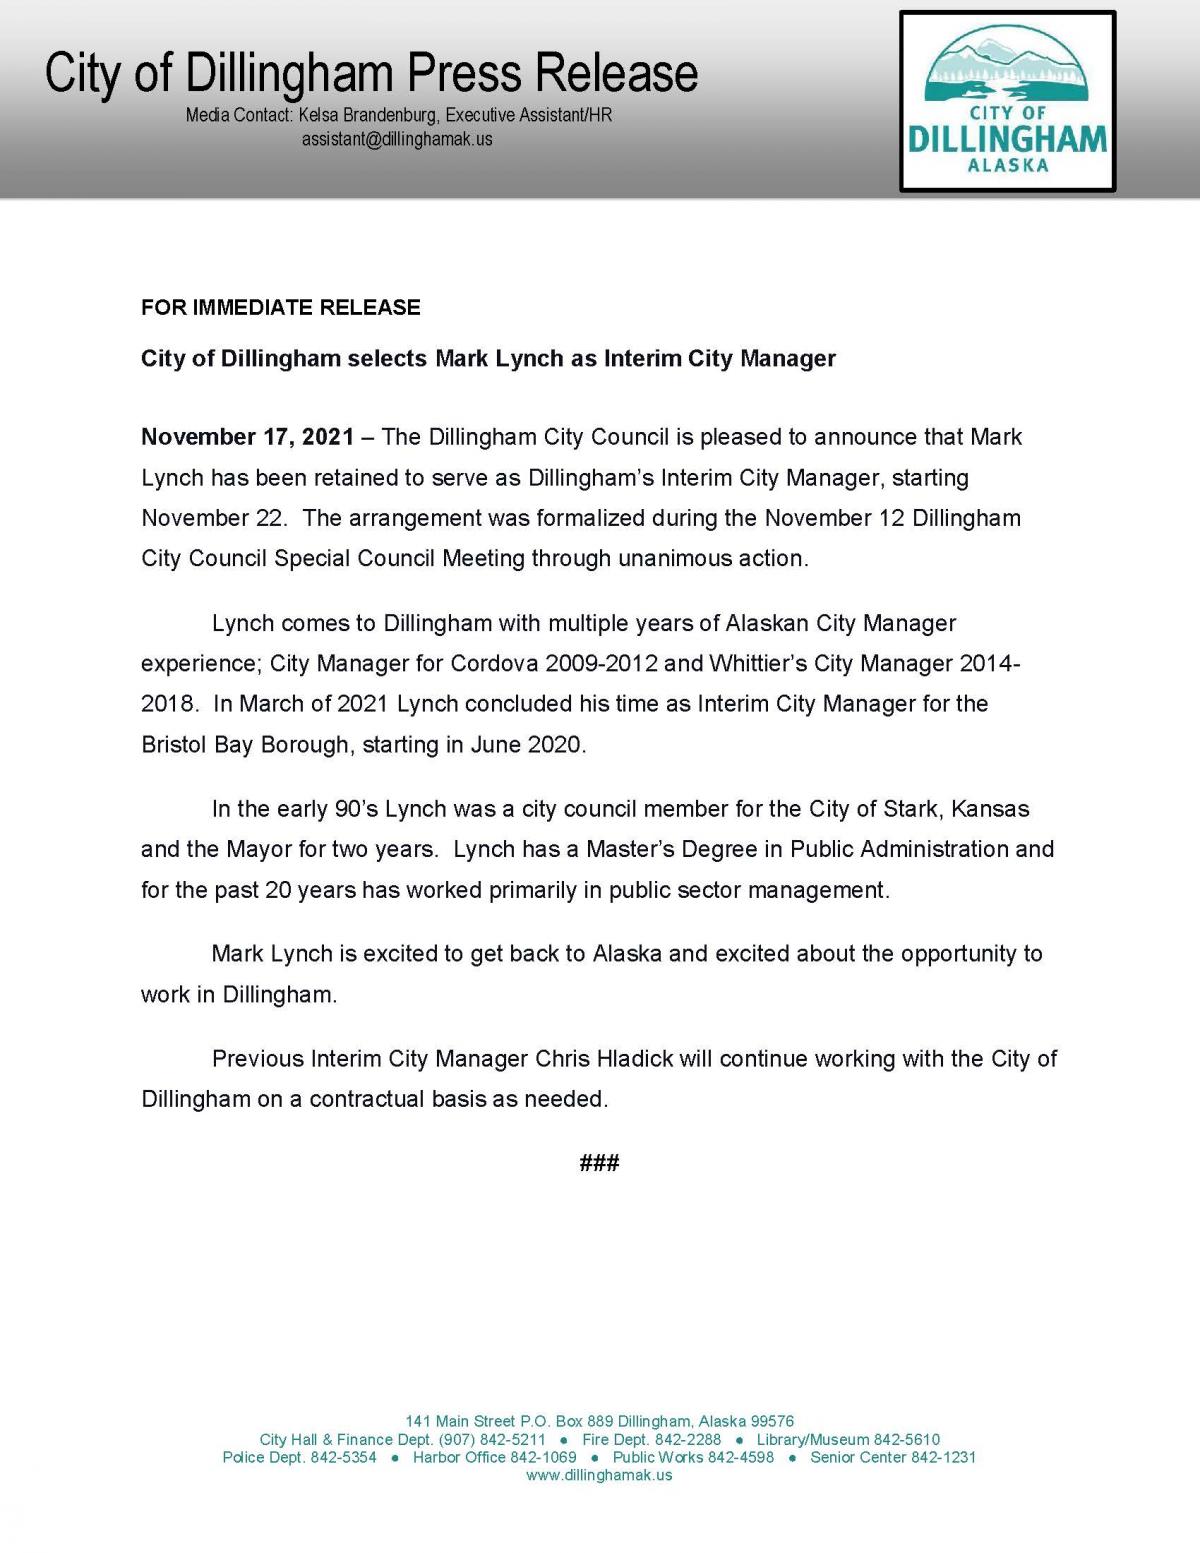 November 17, 2021 City of Dillingham Press Release - City of Dillingham selects Mark Lynch as Interim City Manager 